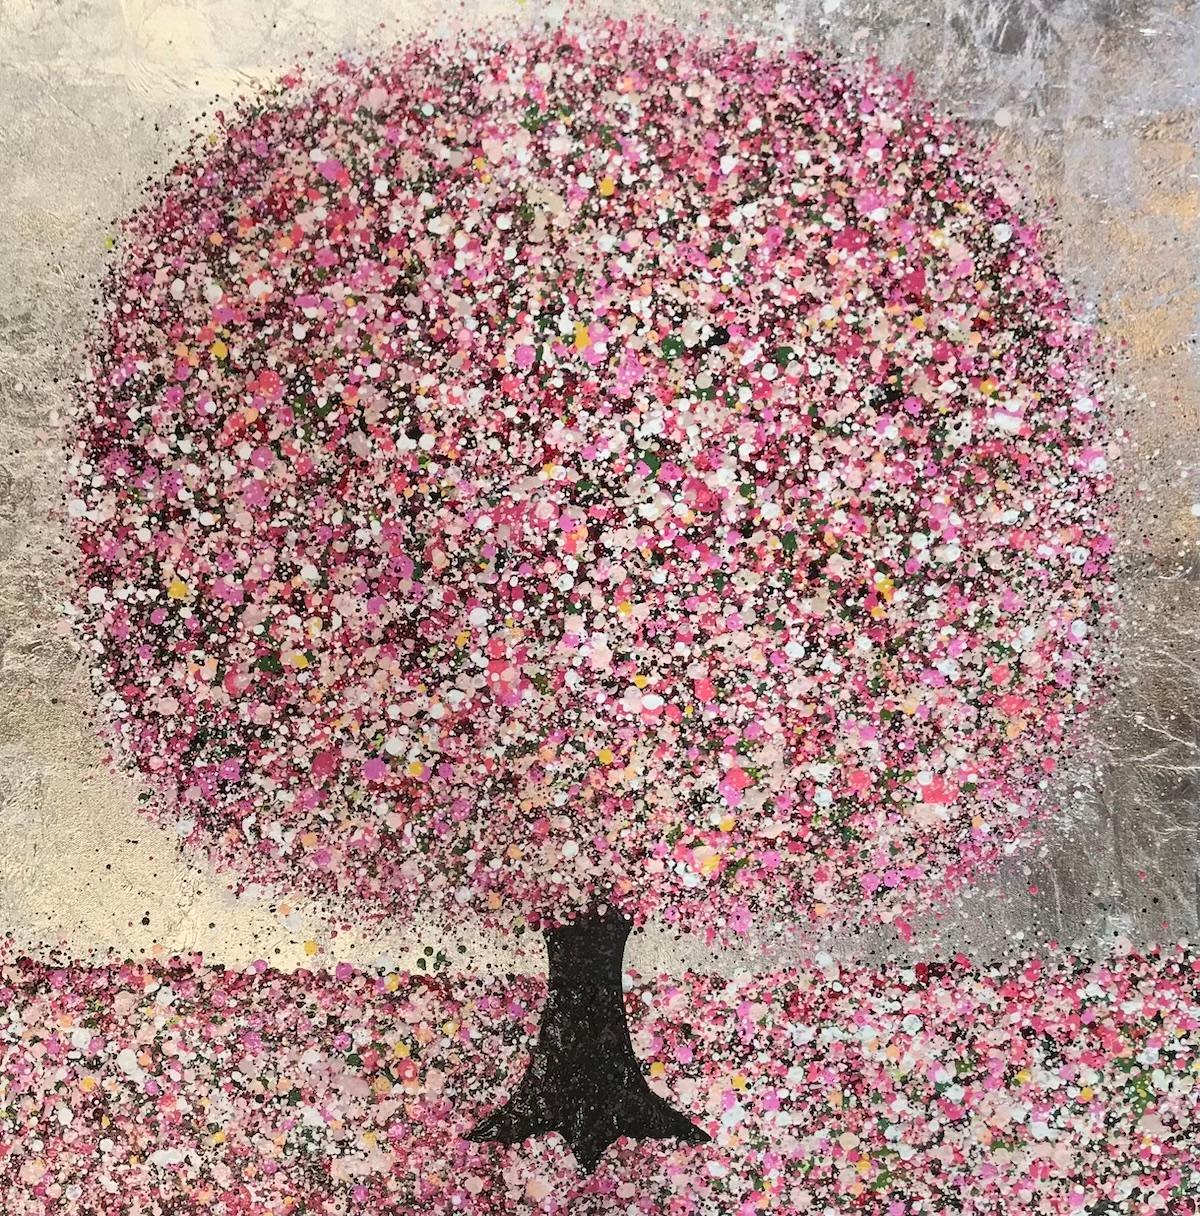 Happy Blossom and a Silver Sky by Nicky Chubb [2020]
original and hand signed by the artist 
Acrylic on Canvas
Image size: H:76 cm x W:76 cm
Complete Size of Unframed Work: H:76 cm x W:76 cm x D:4cm
Sold Unframed
Please note that insitu images are